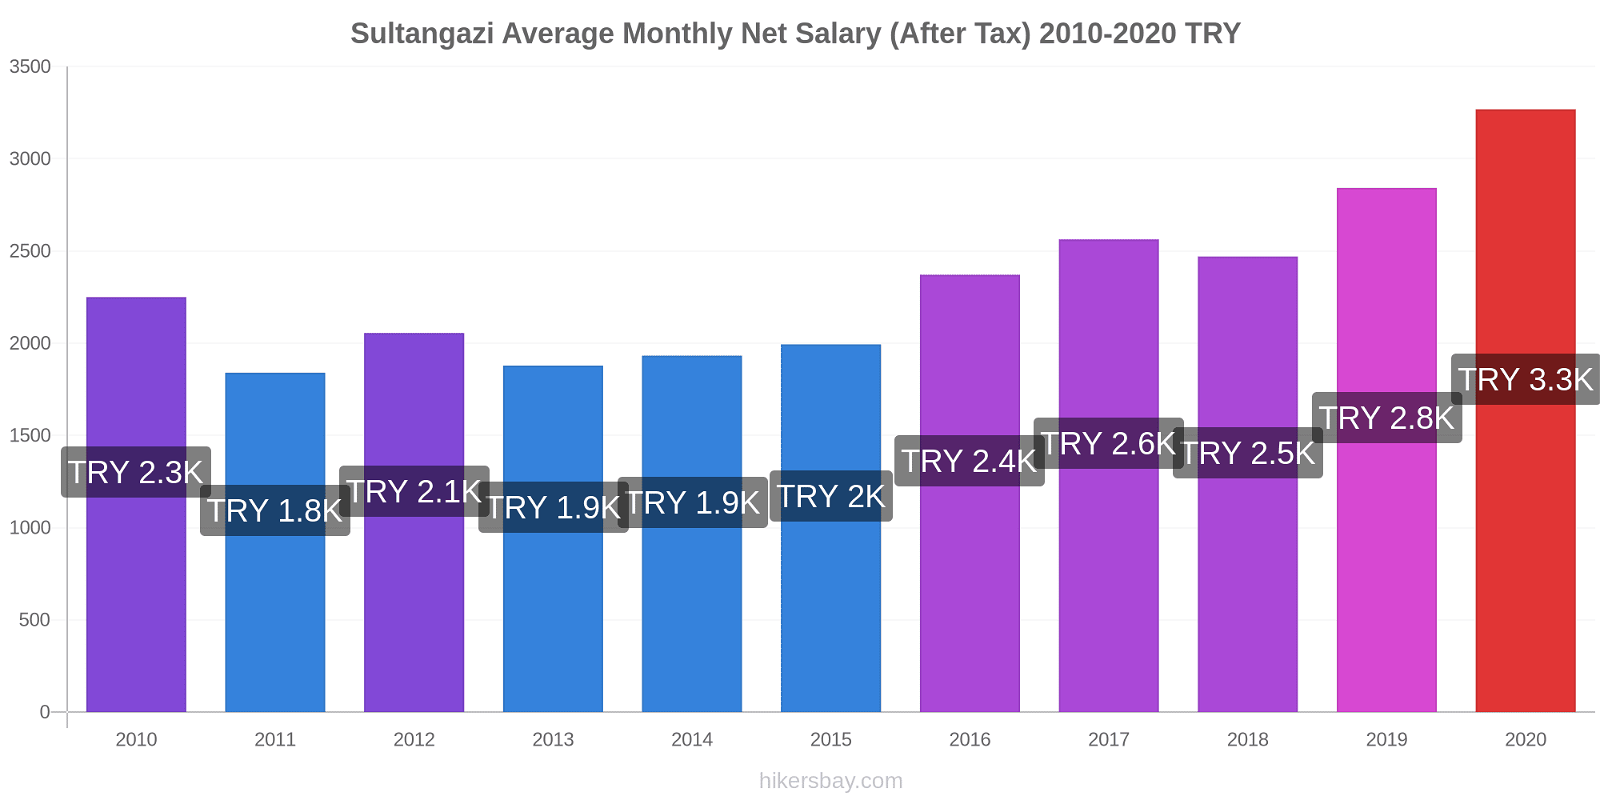 Sultangazi price changes Average Monthly Net Salary (After Tax) hikersbay.com